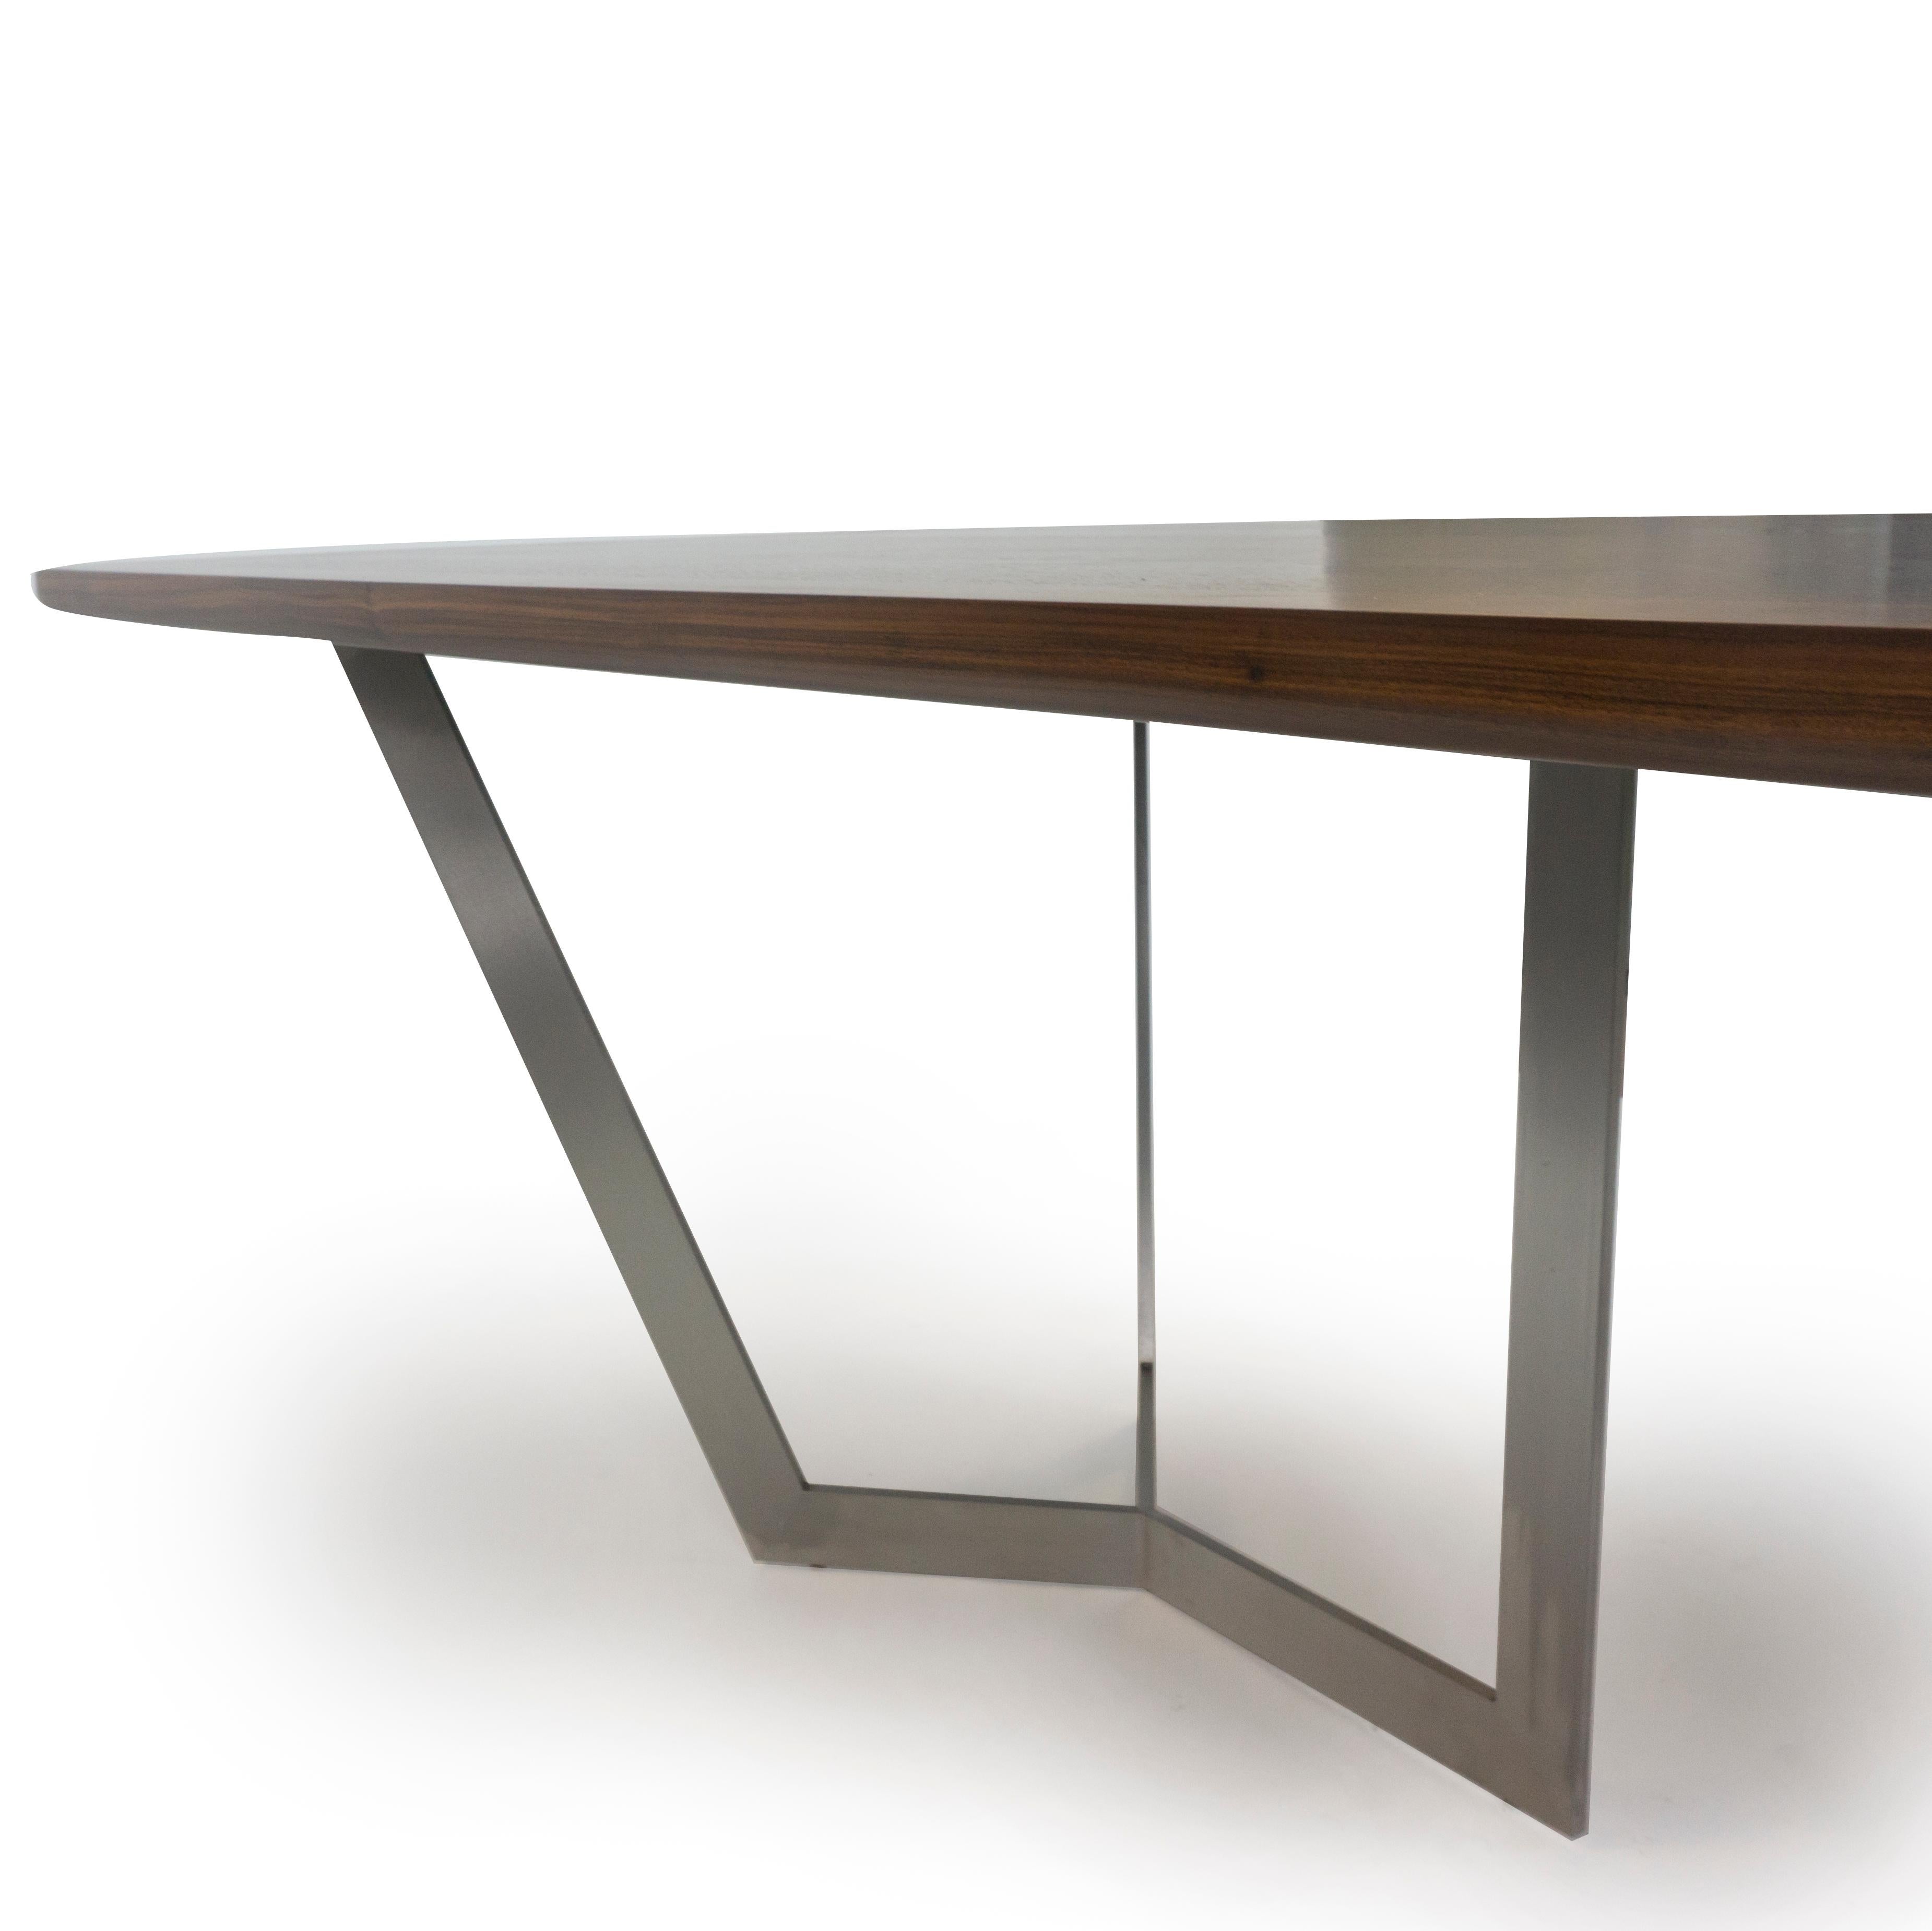 American Modern Dining Room Table with Wooden Top and Stainless Finished Legs For Sale